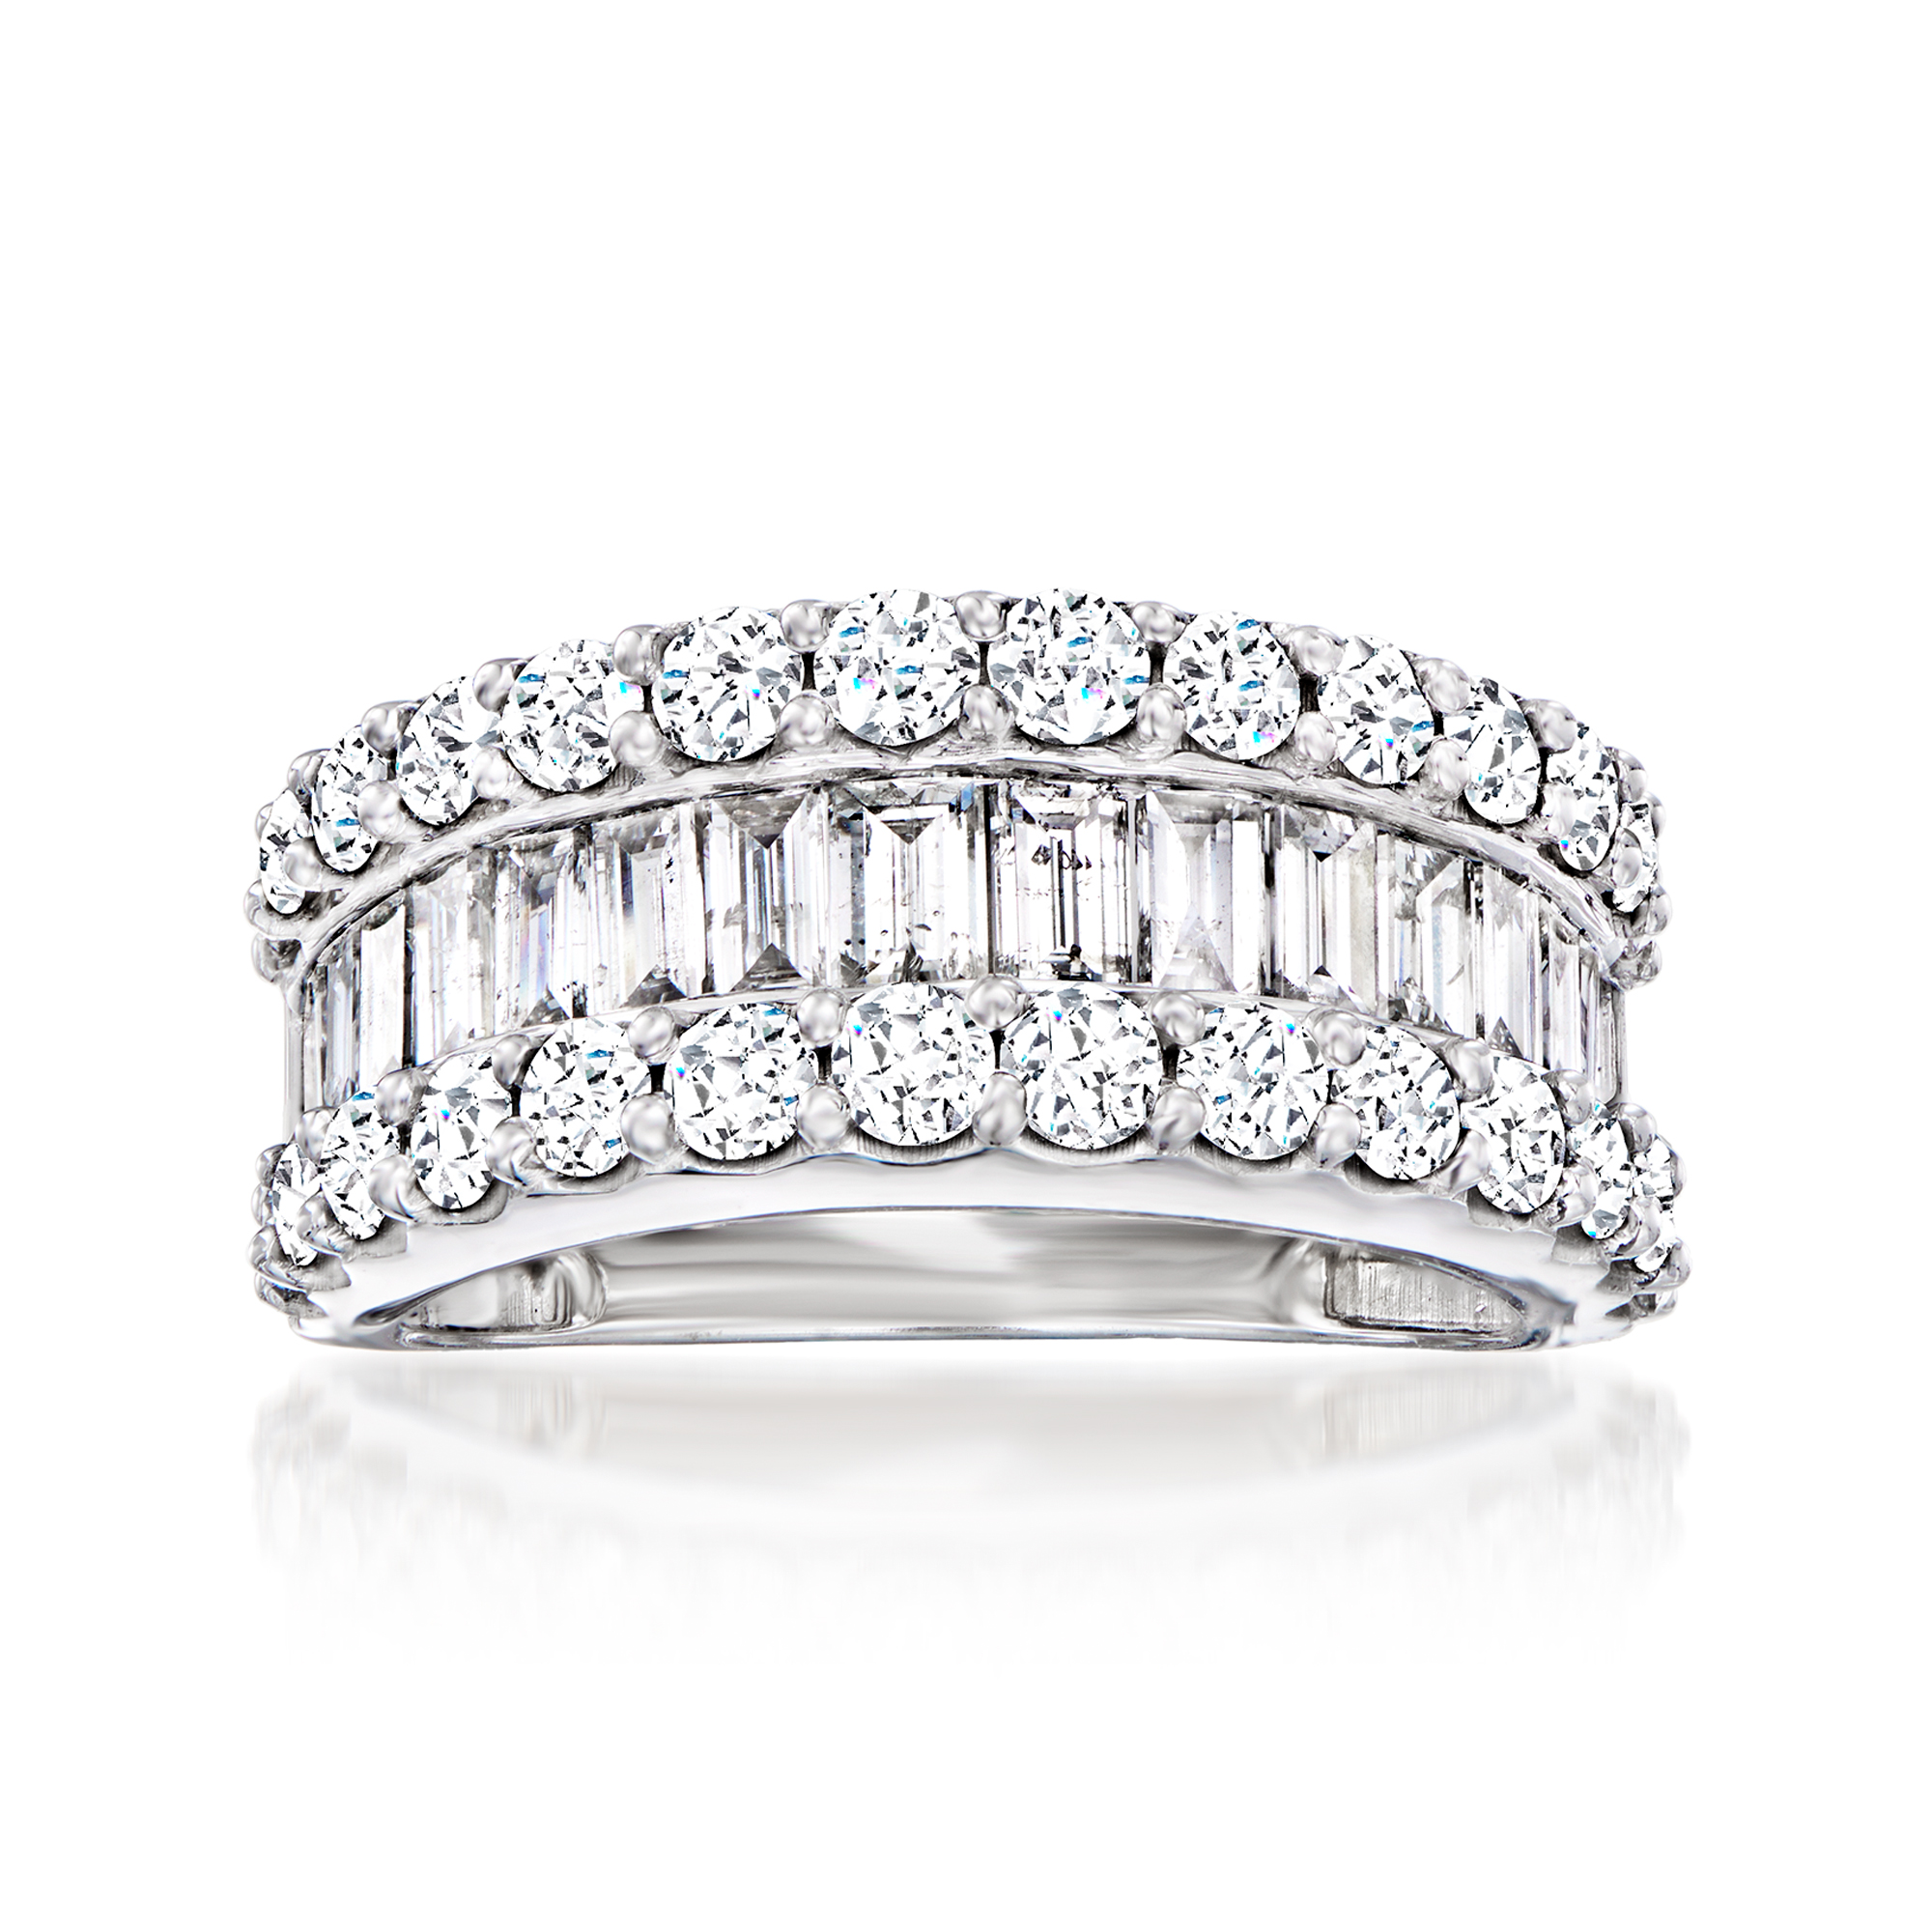 3.00 ct. t.w. Baguette and Round Diamond Ring in 14kt White Gold